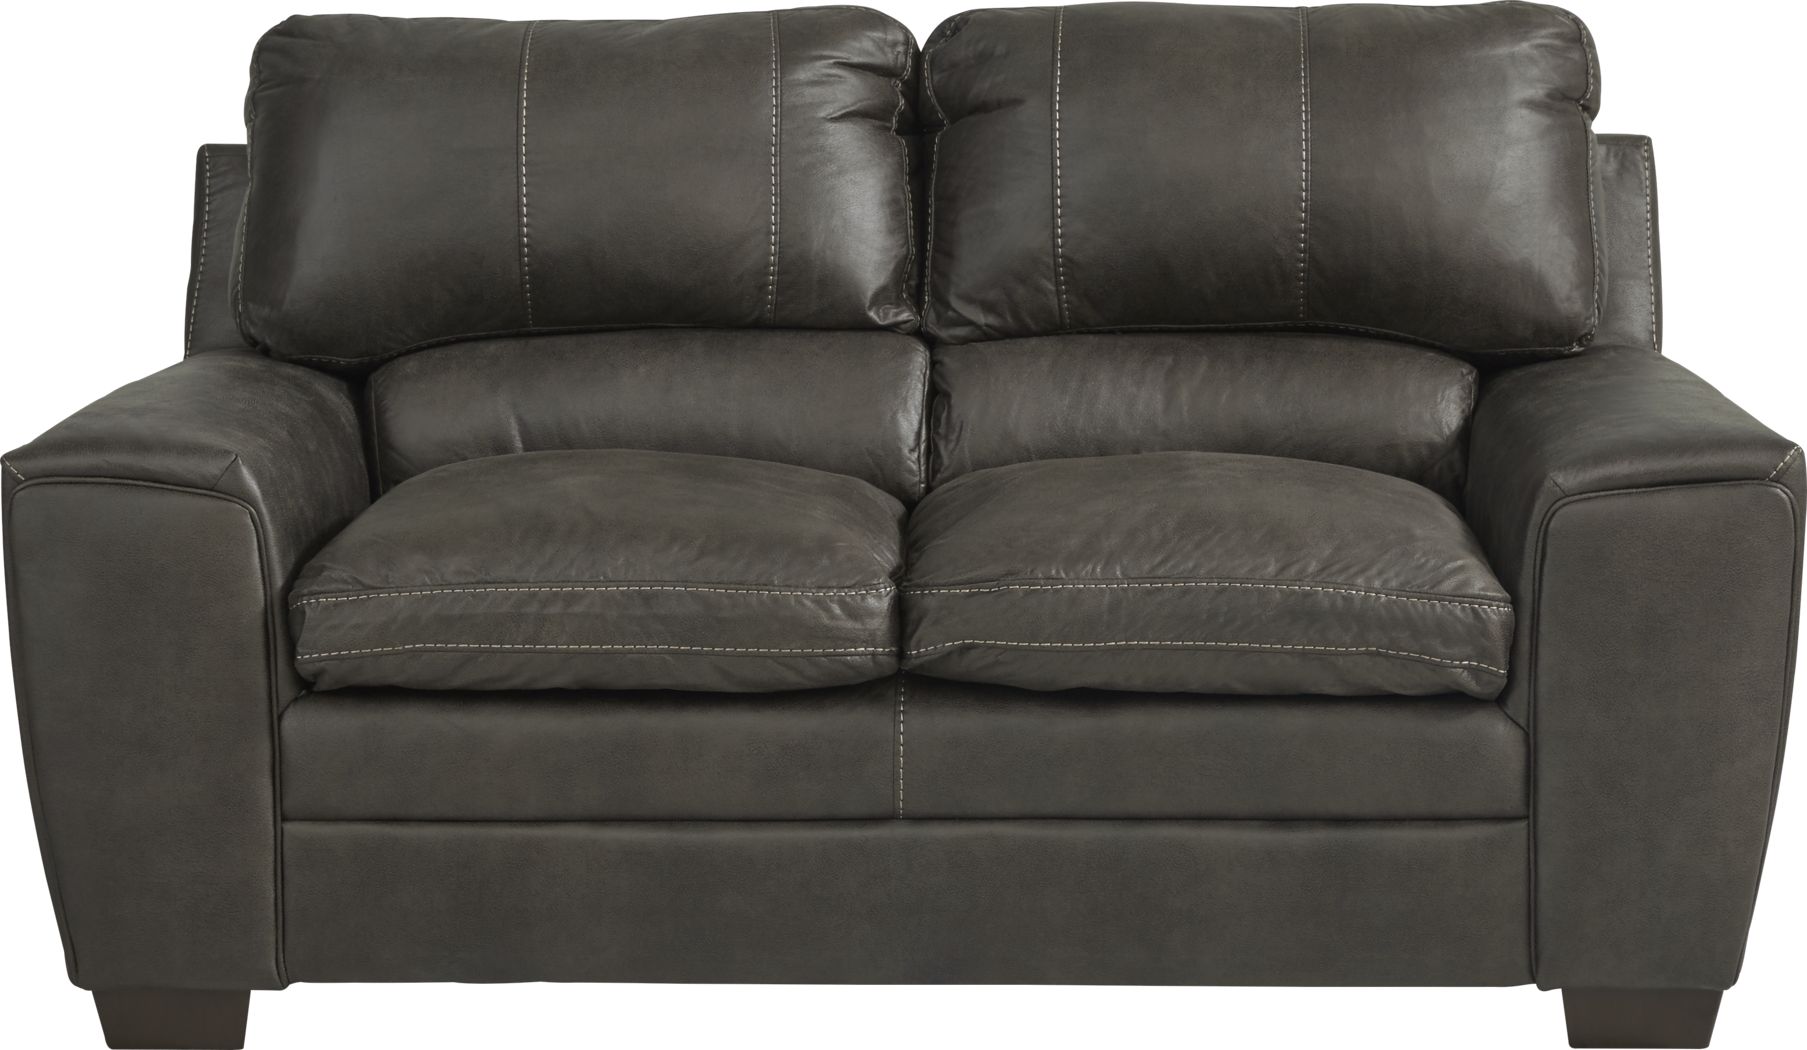 Living Room Furniture Sofas, Rooms To Go Leather Couches